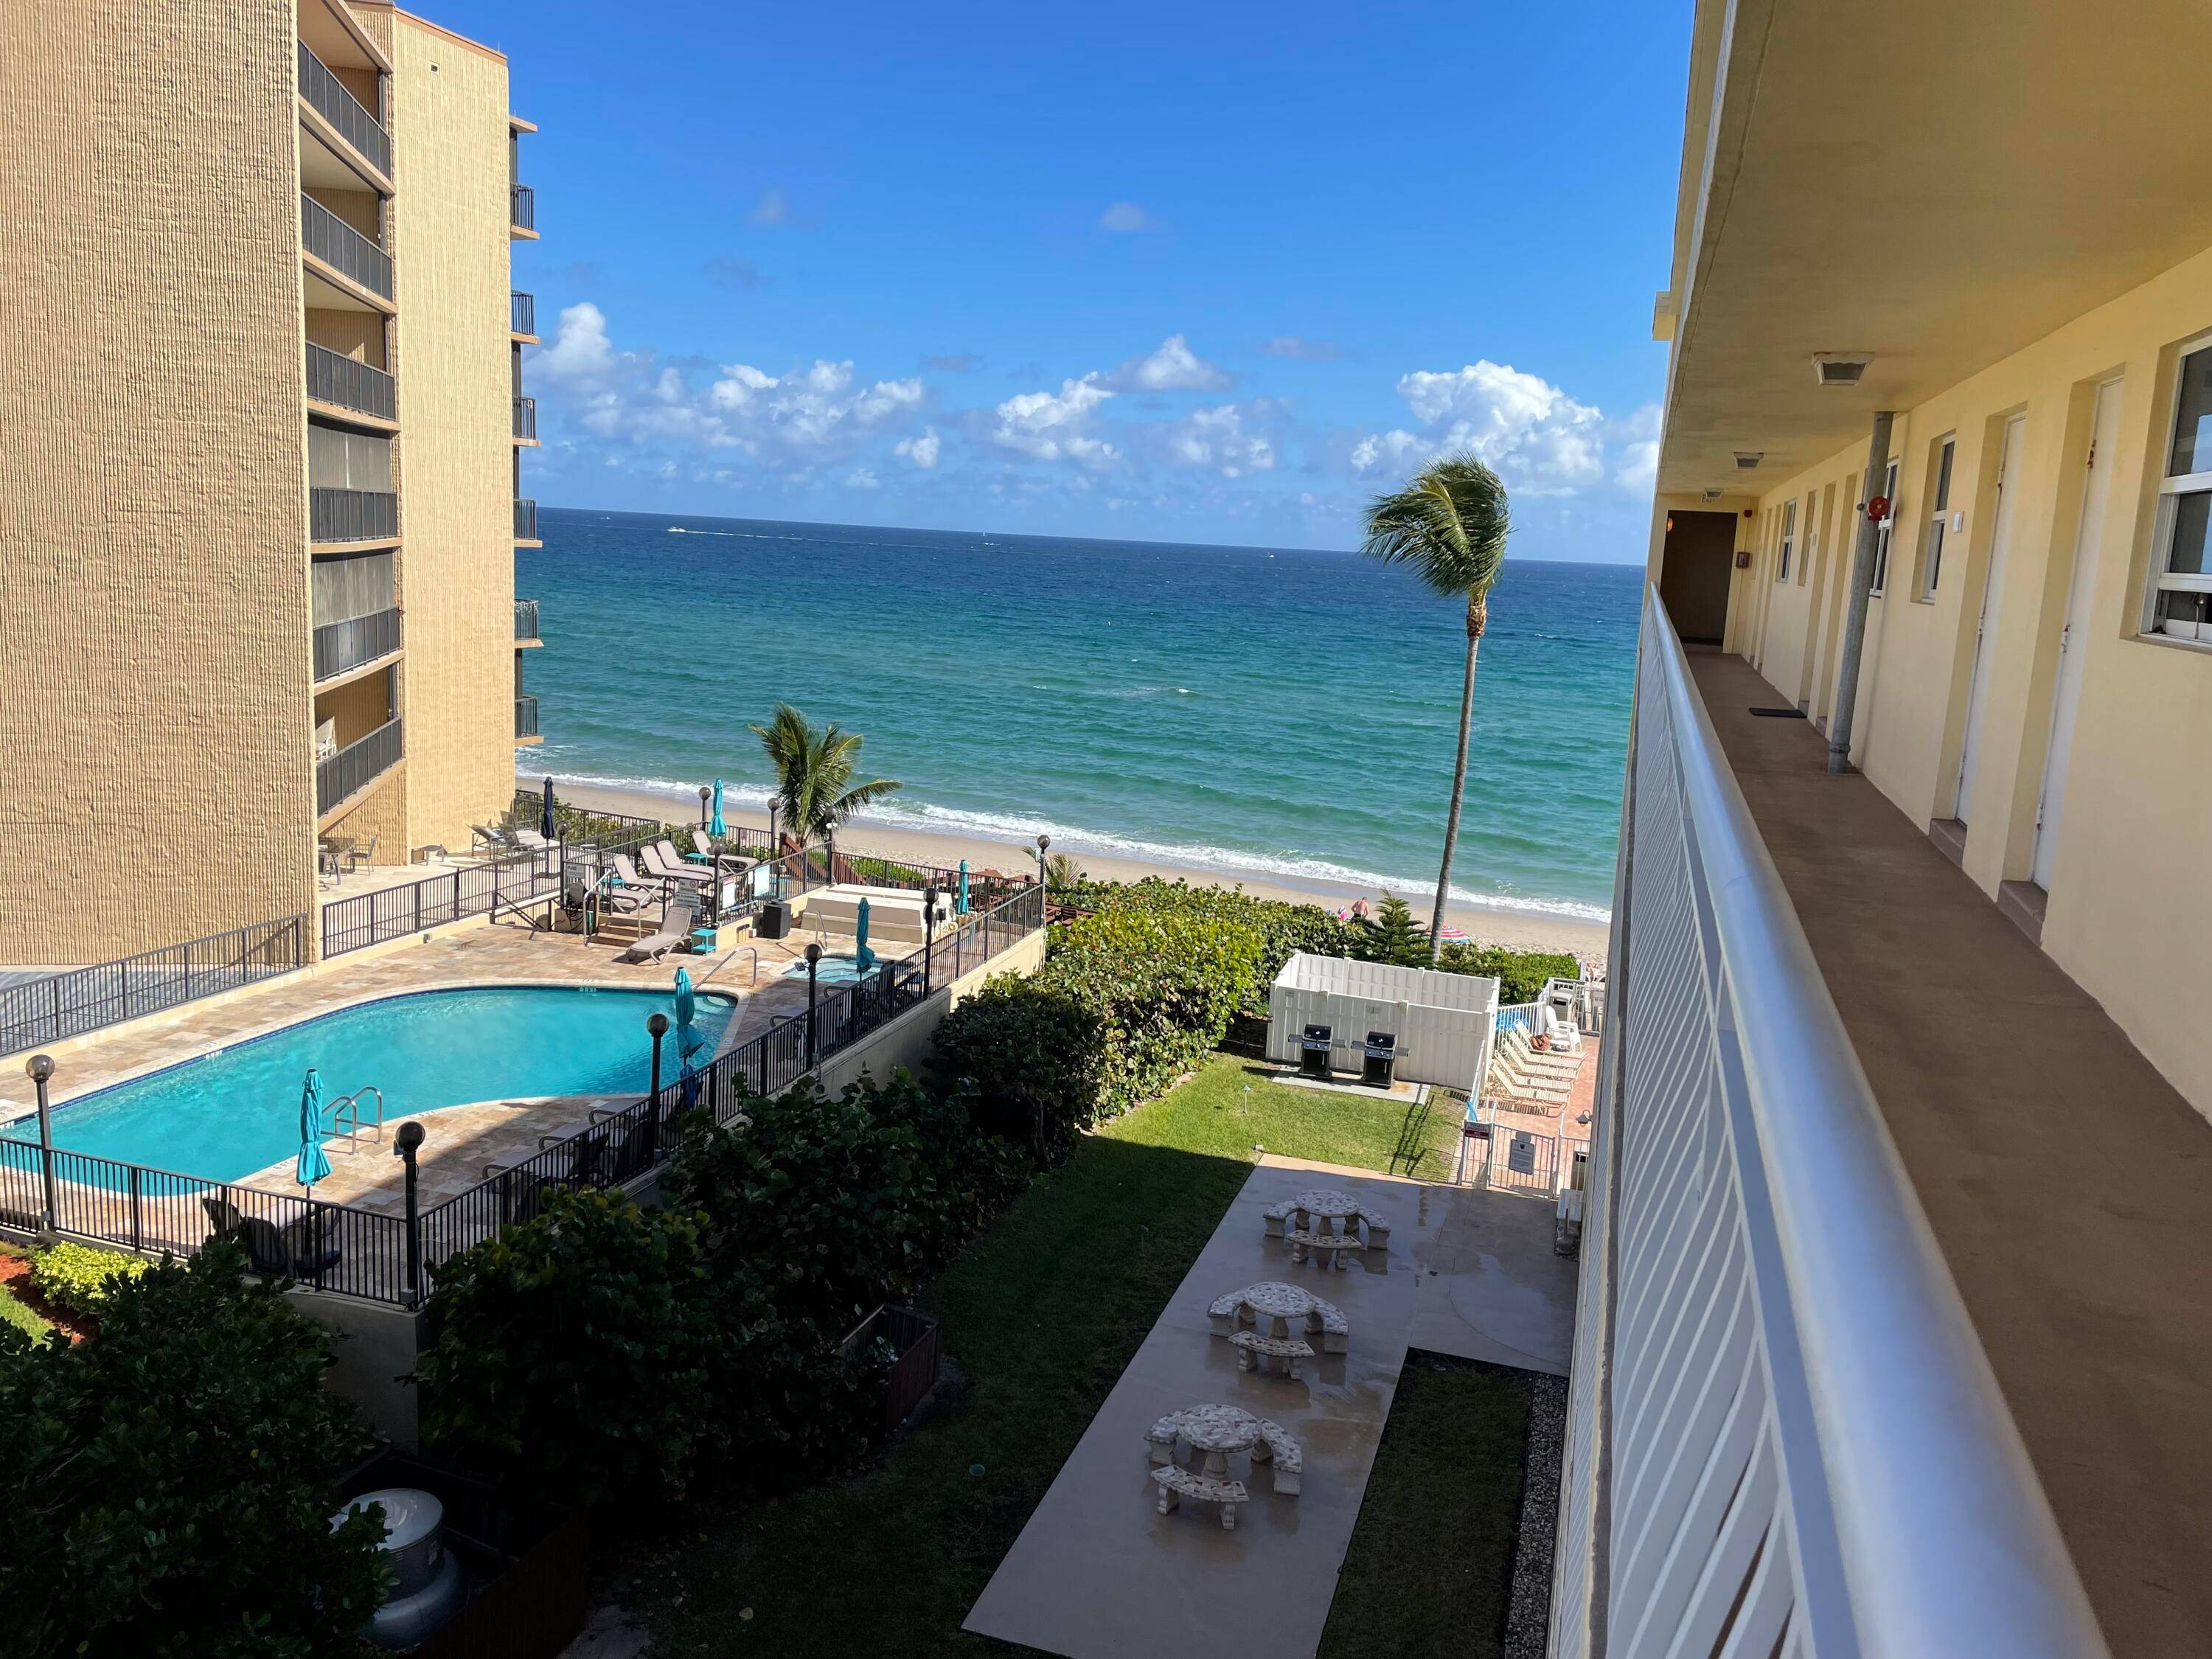 Enjoy living on the Ocean with this 2 bedroom, 2 bath home which is located directly on the Atlantic Ocean on Hillsboro Beach and also has Intercoastal views.